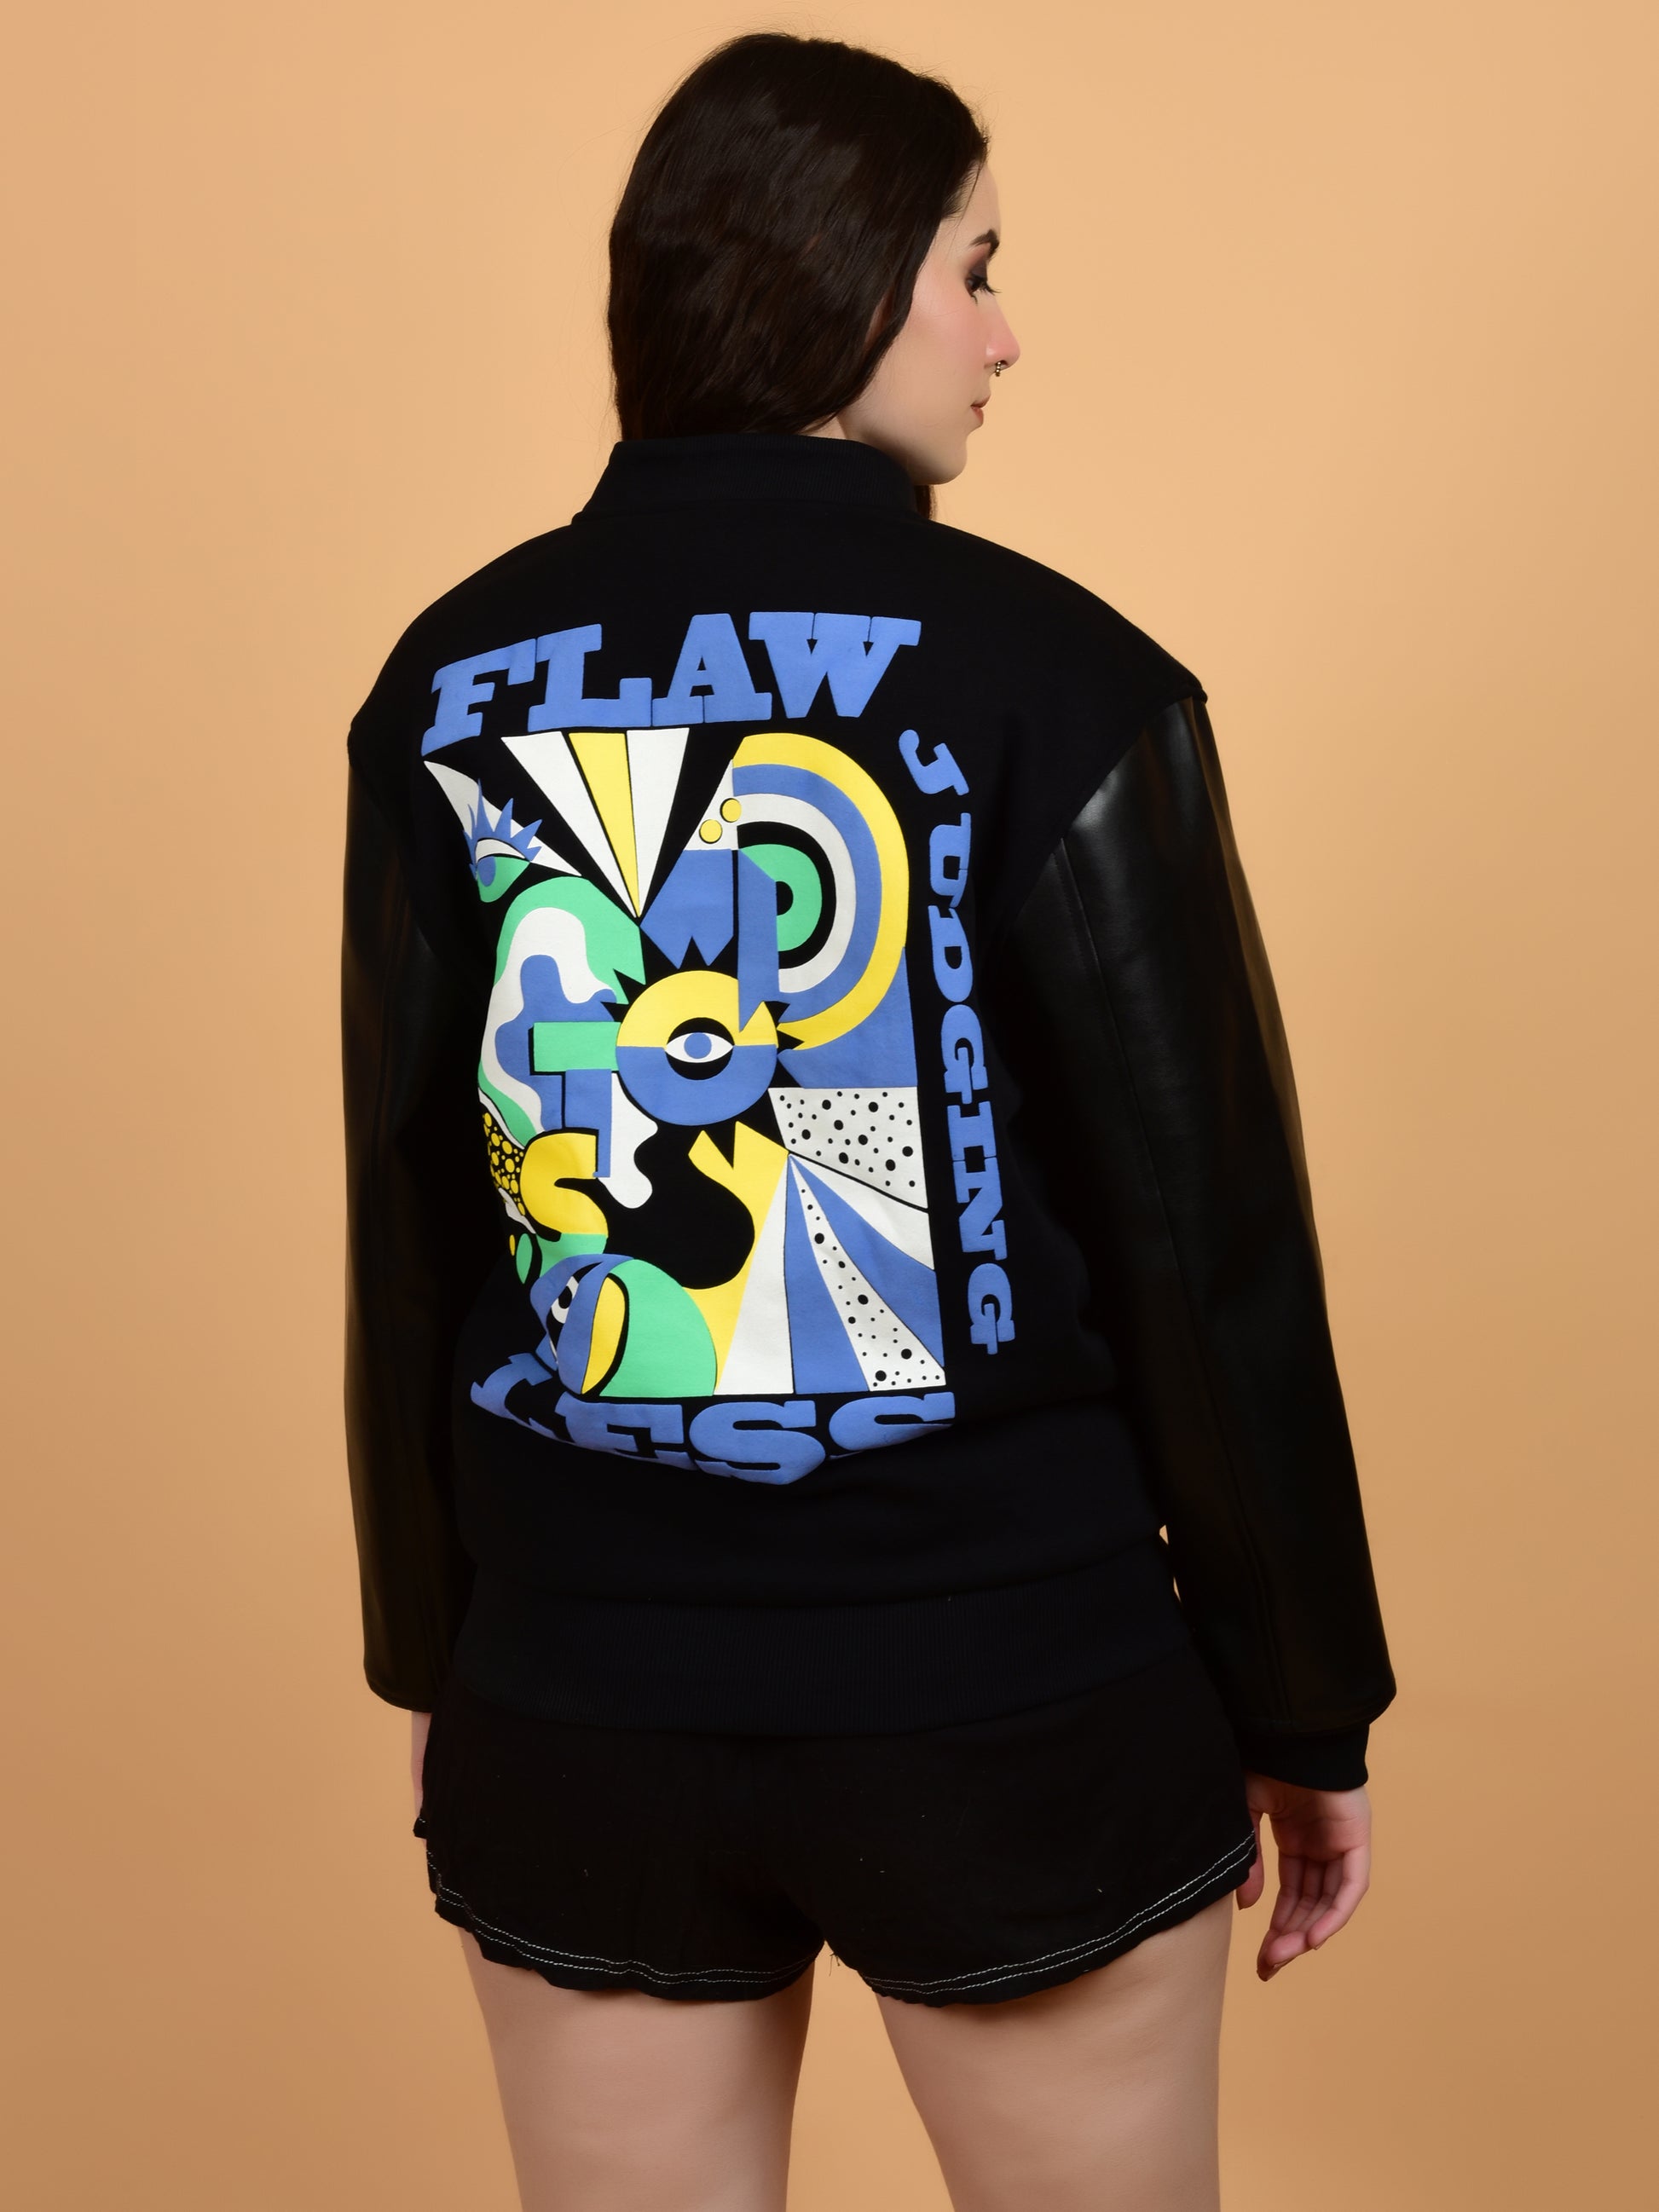 Flawless Printed Bomber Jackets for Women Being Flawless